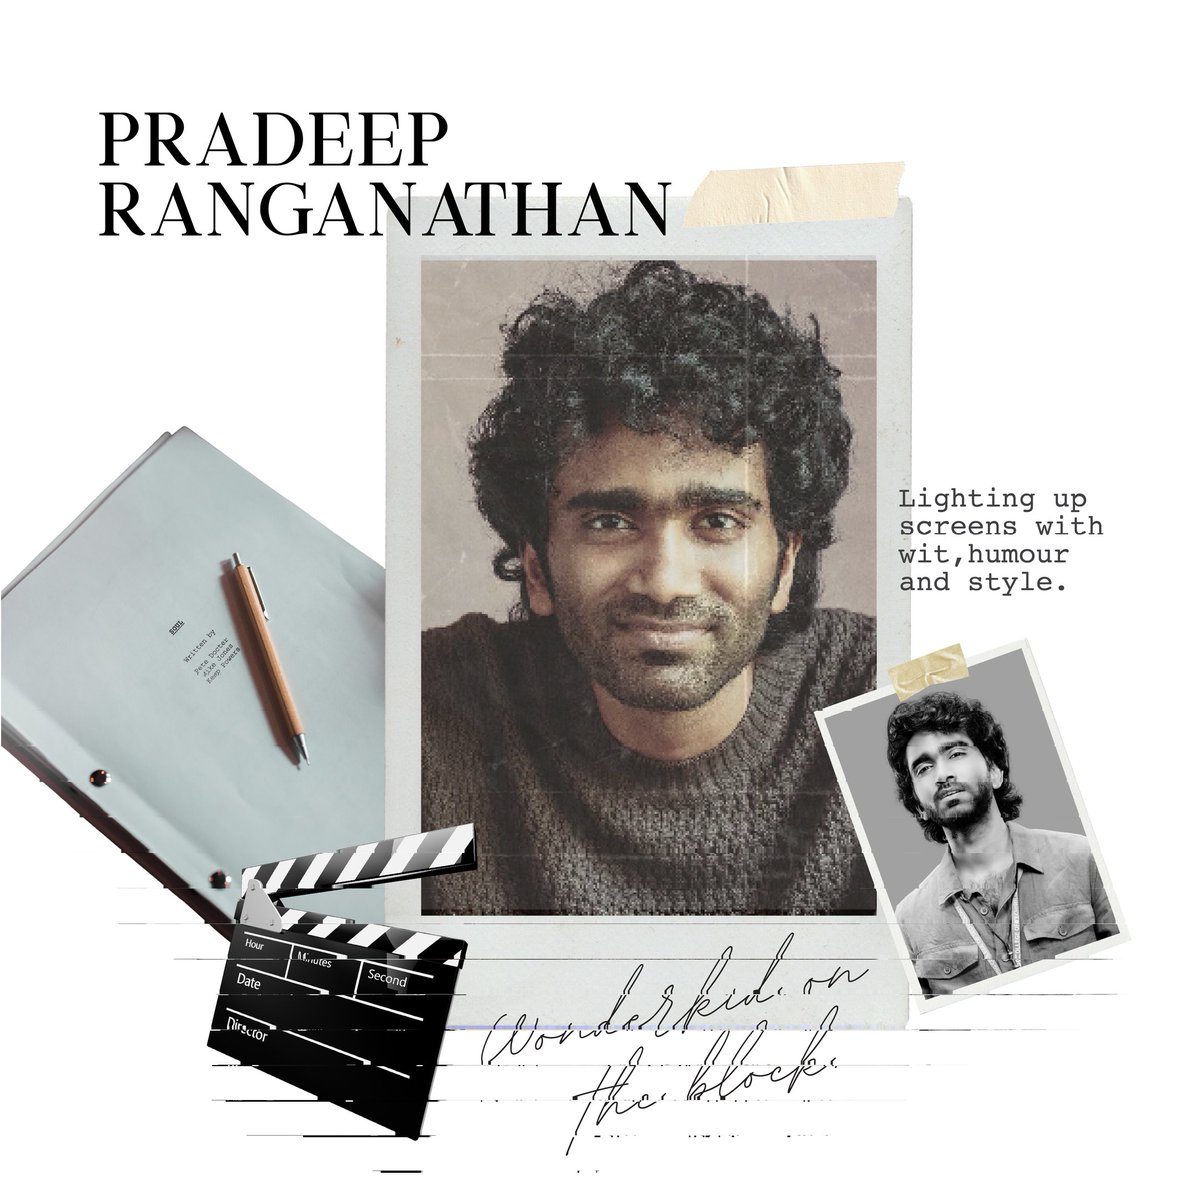 Our wonderkid Pradeep, a trailblazer in acting and storytelling, defies boundaries by seamlessly blending genres with raw human emotions. @pradeeponelife #Southbay #SouthbayTalent #Pradeepranganathan #IndianCinema #Indianactor #filmmaker